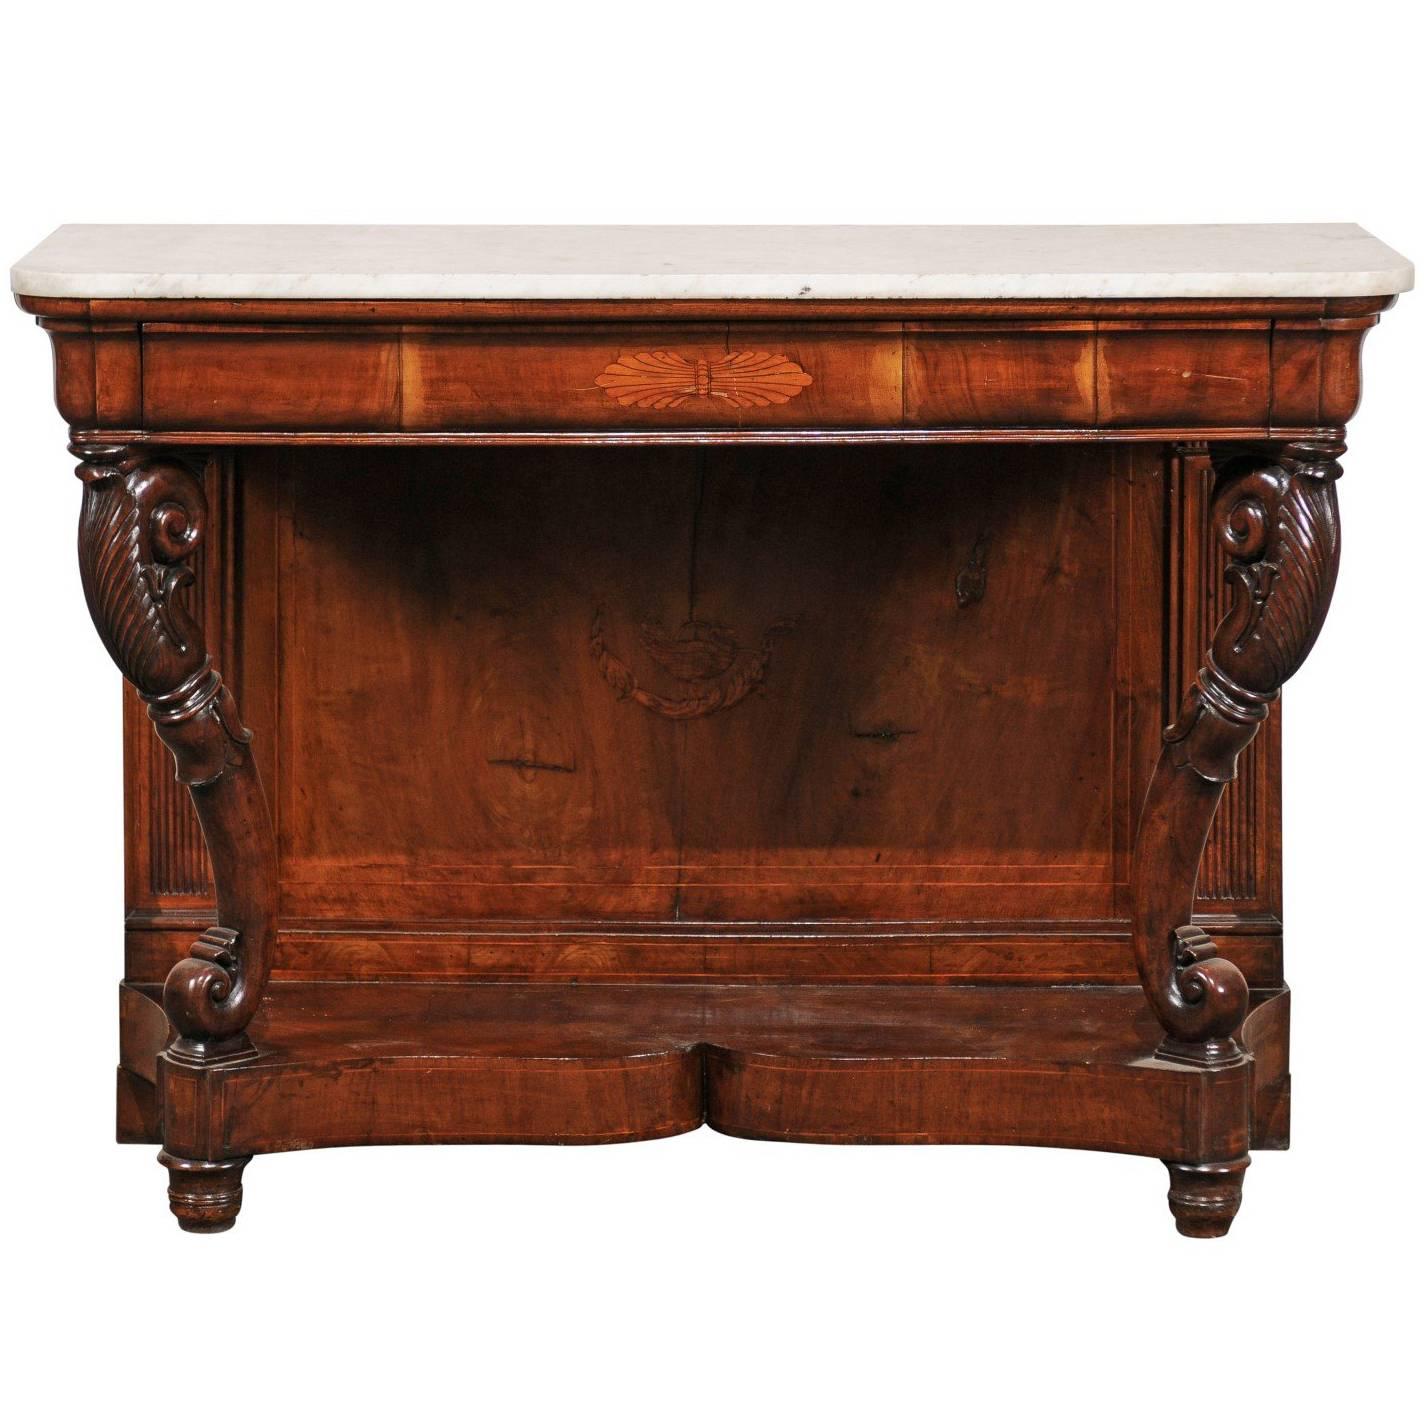 Italian 19th Century Walnut Console with Marble Top